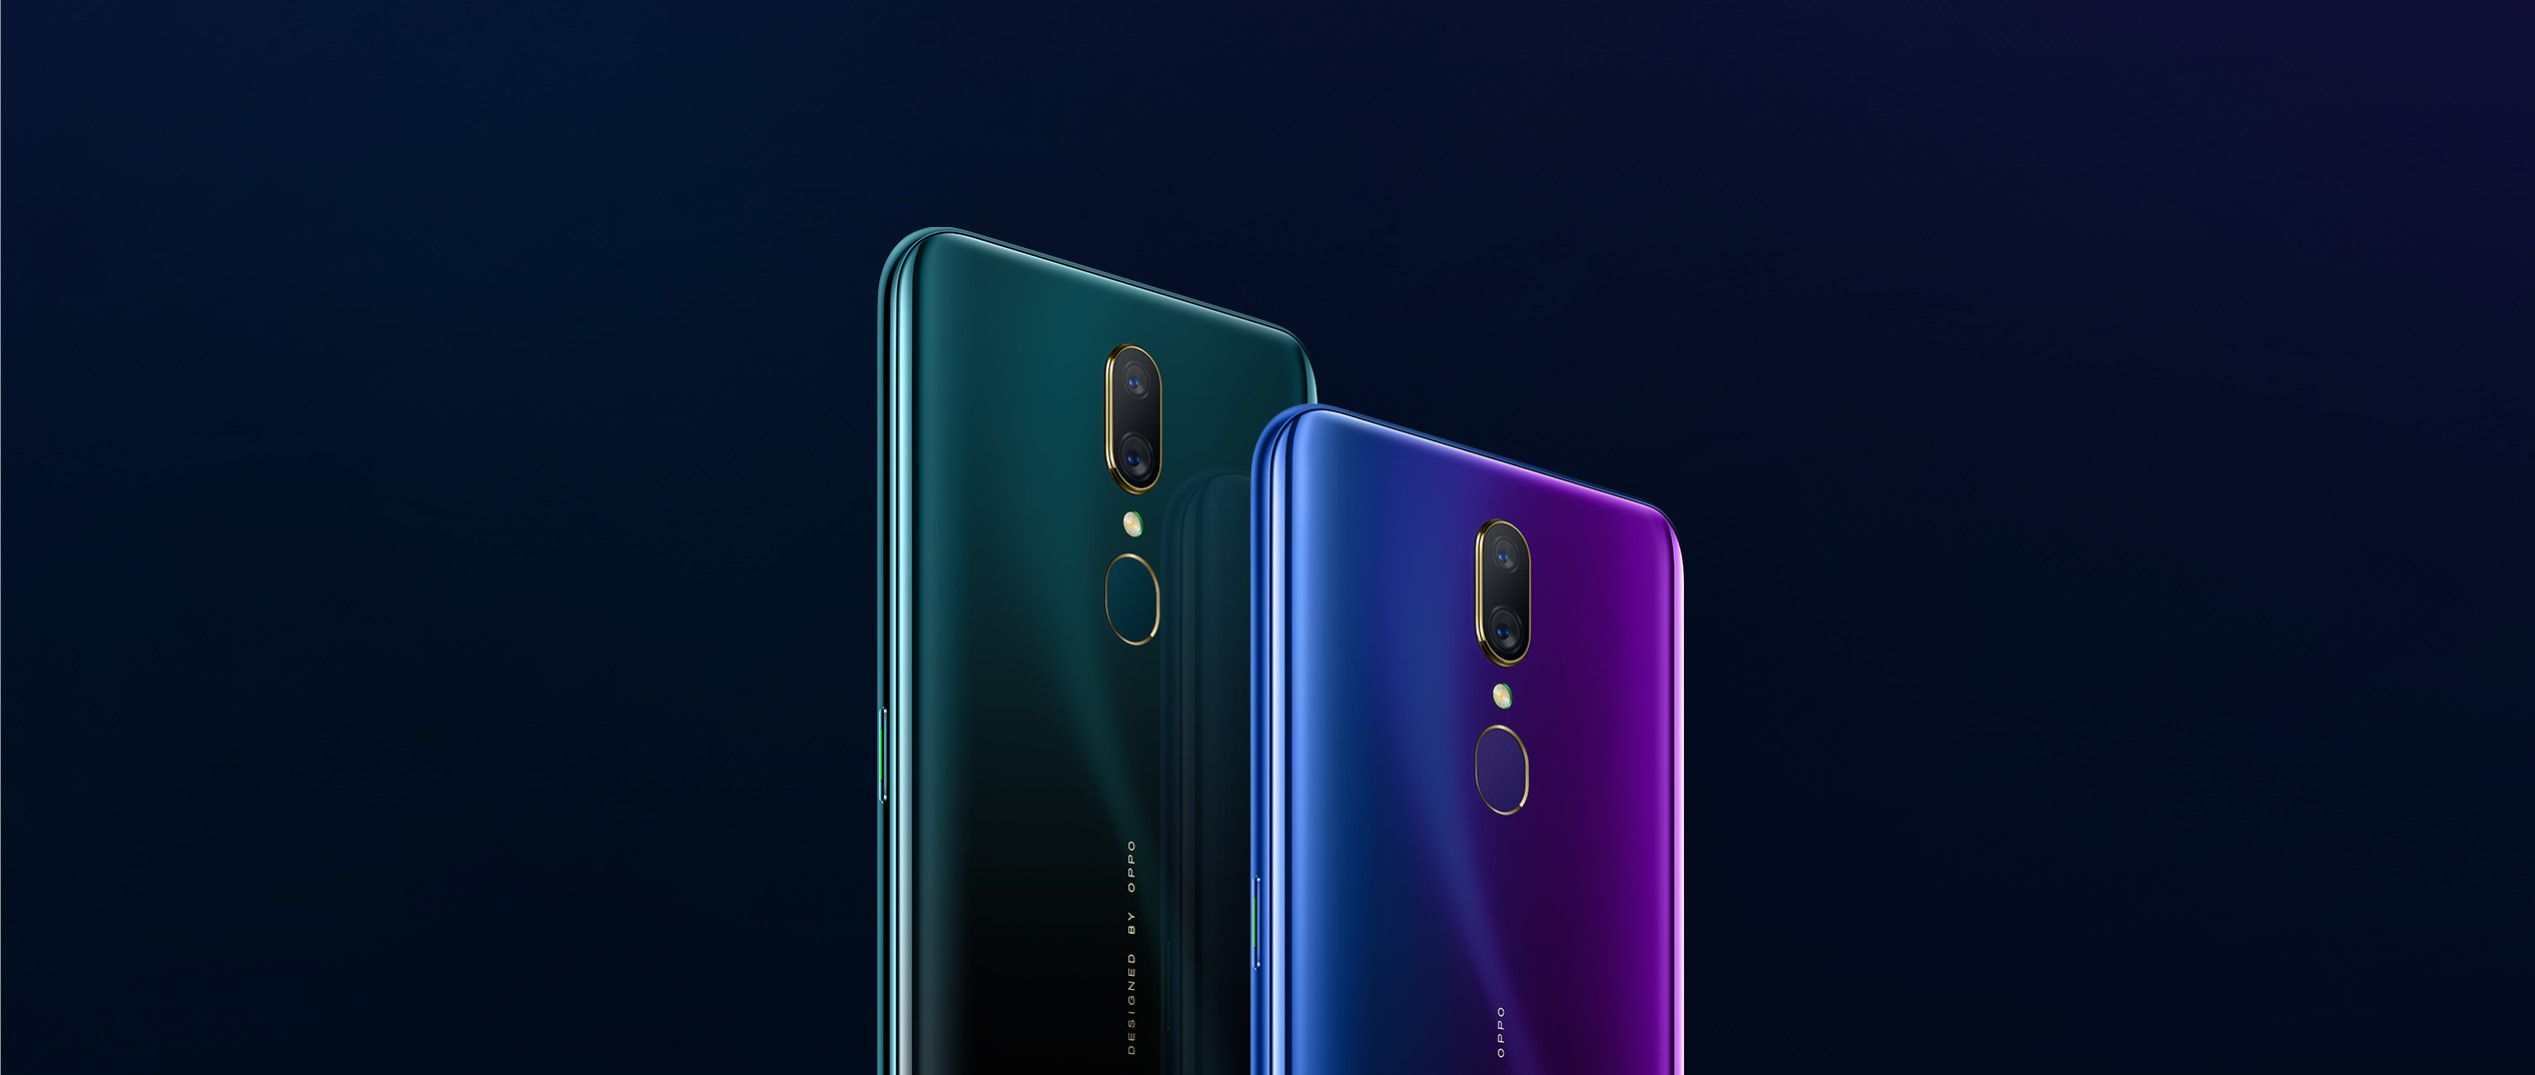 OPPO A9 Warna "width =" 2535 "height =" 1075 "srcset =" https://assets.mspimages.in/gear/wp-content/uploads/2019/07/OPPO-A9-Colors.jpg 2535w, https: //assets.mspimages.in/gear/wp-content/uploads/2019/07/OPPO-A9-Colors-300x127.jpg 300w, https://assets.mspimages.in/gear/wp-content/uploads/2019 /07/OPPO-A9-Colors-768x326.jpg 768w, https://assets.mspimages.in/gear/wp-content/uploads/2019/07/OPPO-A9-Colors-1024x434.jpg 1024w, https: / /assets.mspimages.in/gear/wp-content/uploads/2019/07/OPPO-A9-Colors-696x295.jpg 696w, https://assets.mspimages.in/gear/wp-content/uploads/2019/ 07 / OPPO-A9-Colors-1068x453.jpg 1068w, https://assets.mspimages.in/gear/wp-content/uploads/2019/07/OPPO-A9-Colors-990x420.jpg 990w, https: // assets.mspimages.in/gear/wp-content/uploads/2019/07/OPPO-A9-Colors-50x21.jpg 50w "ukuran =" (lebar maks: 2535px) 100vw, 2535px